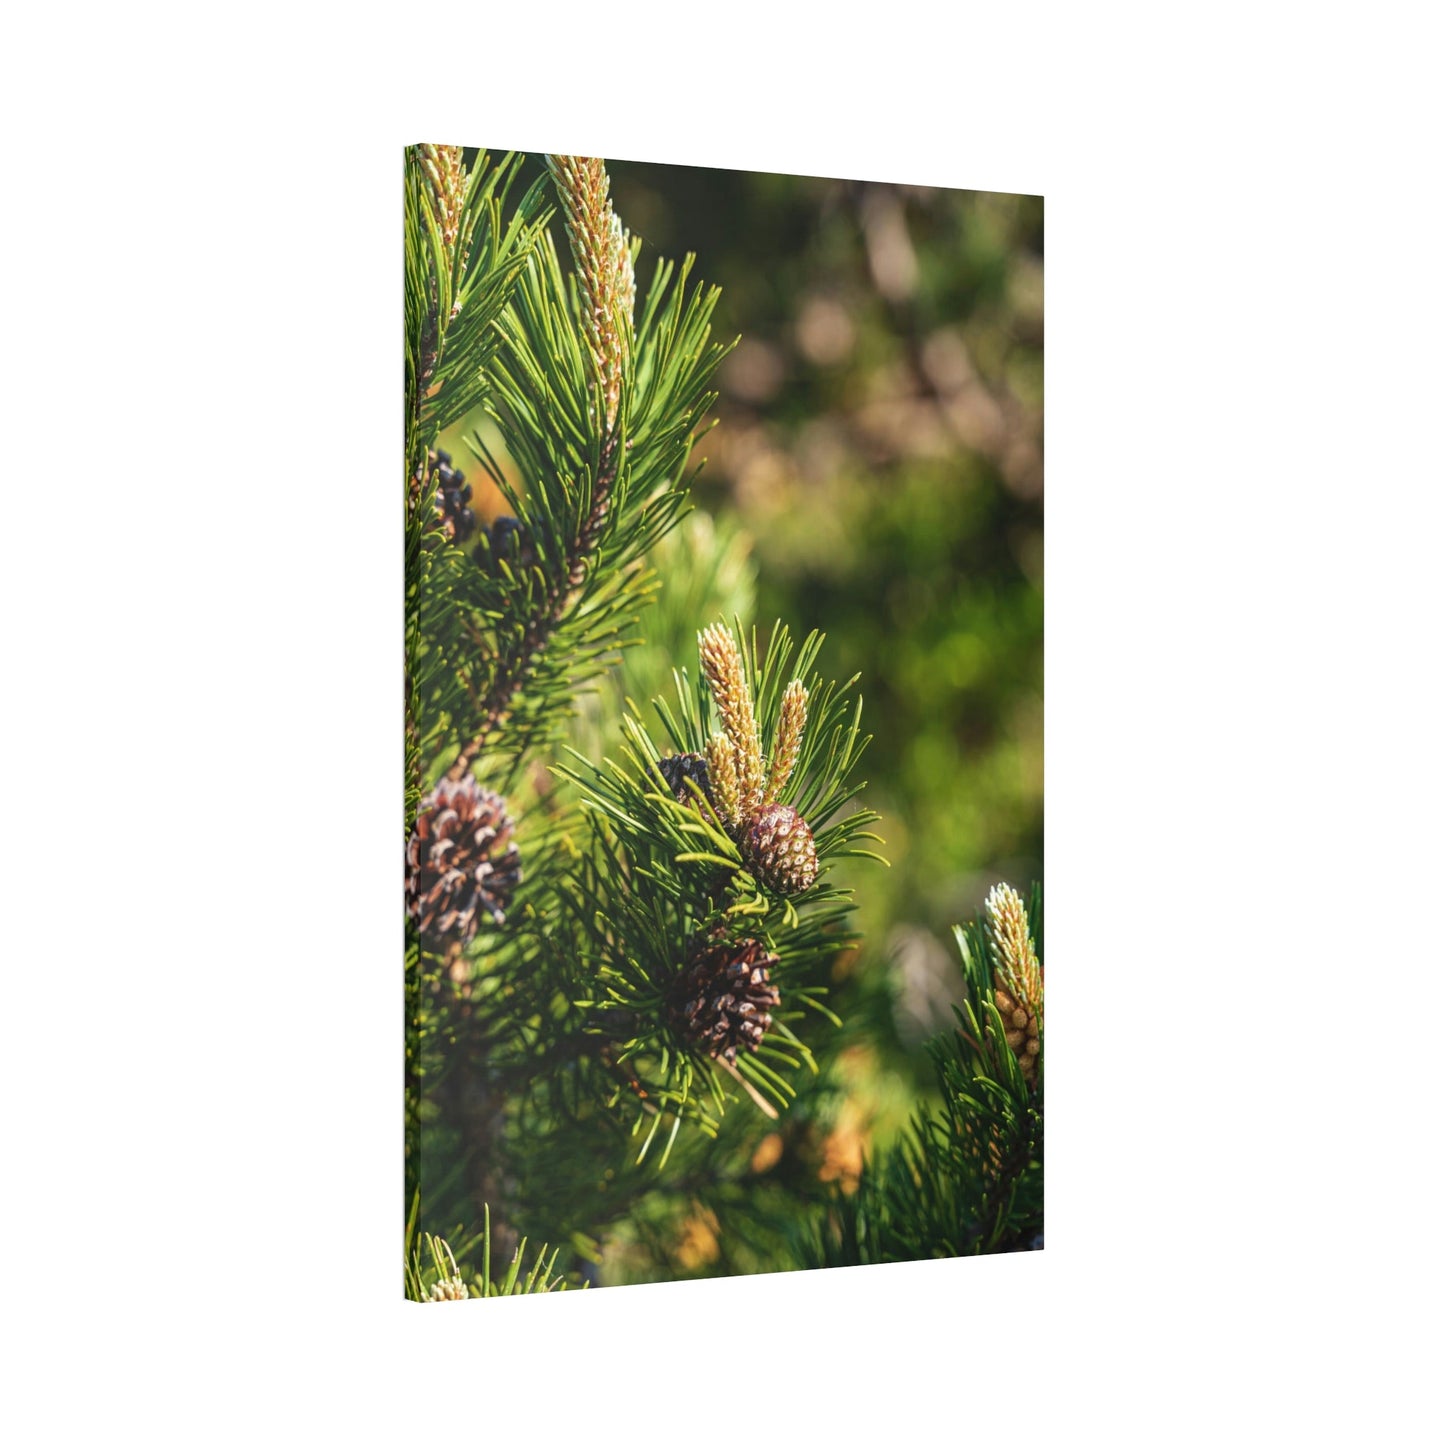 Whispering Pines: A Canvas of Tranquility and Serenity